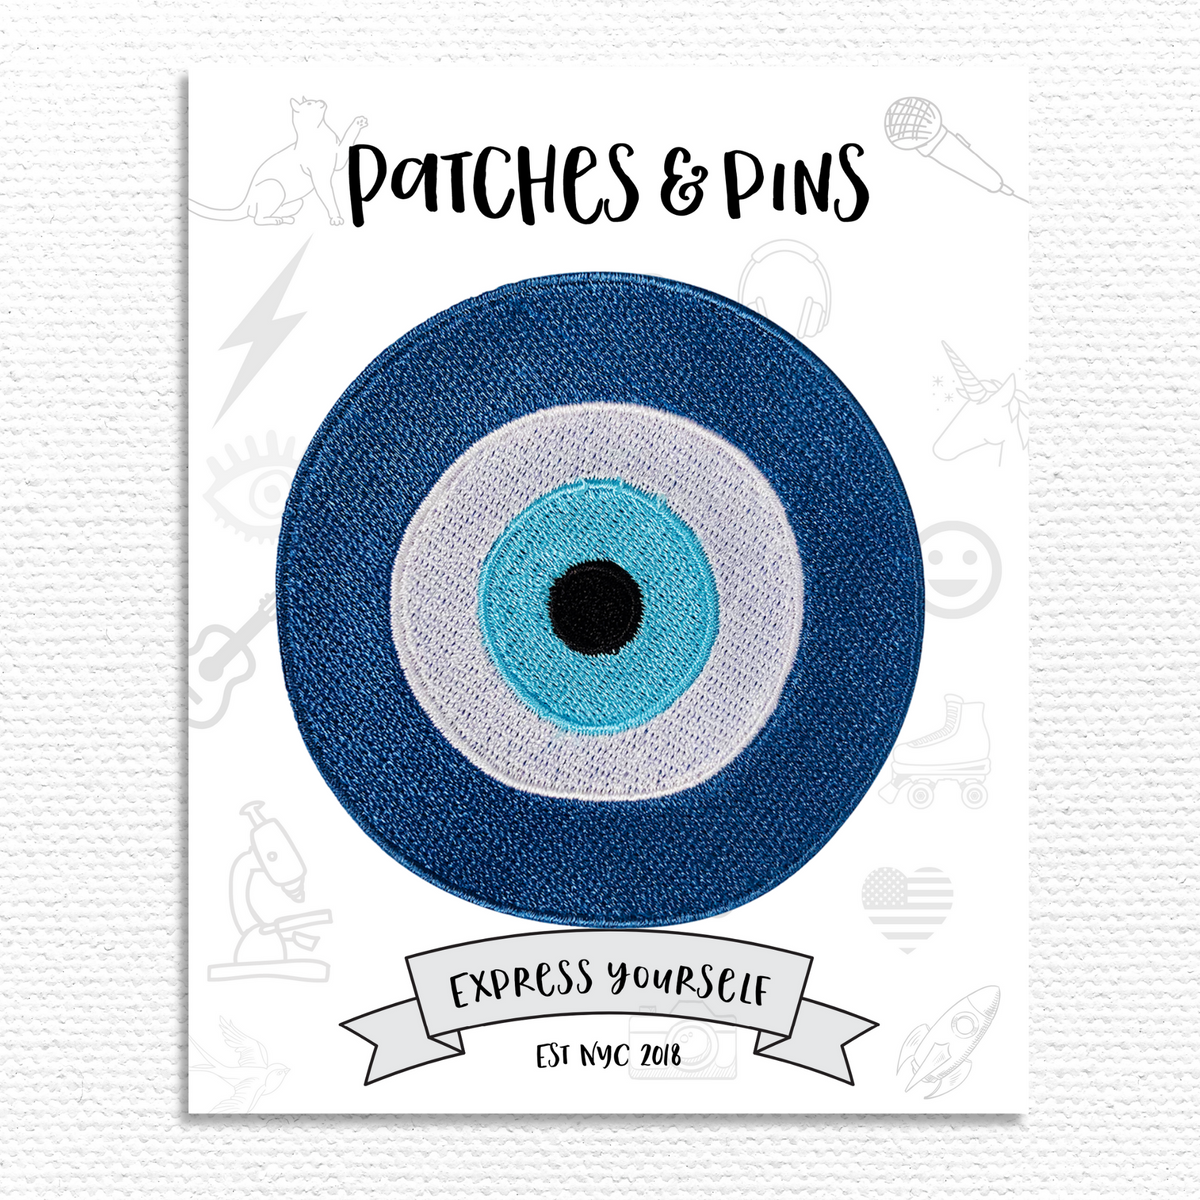 GREEK 'EVIL EYE' PROTECTION PATCH – The Patch Parlour Collective